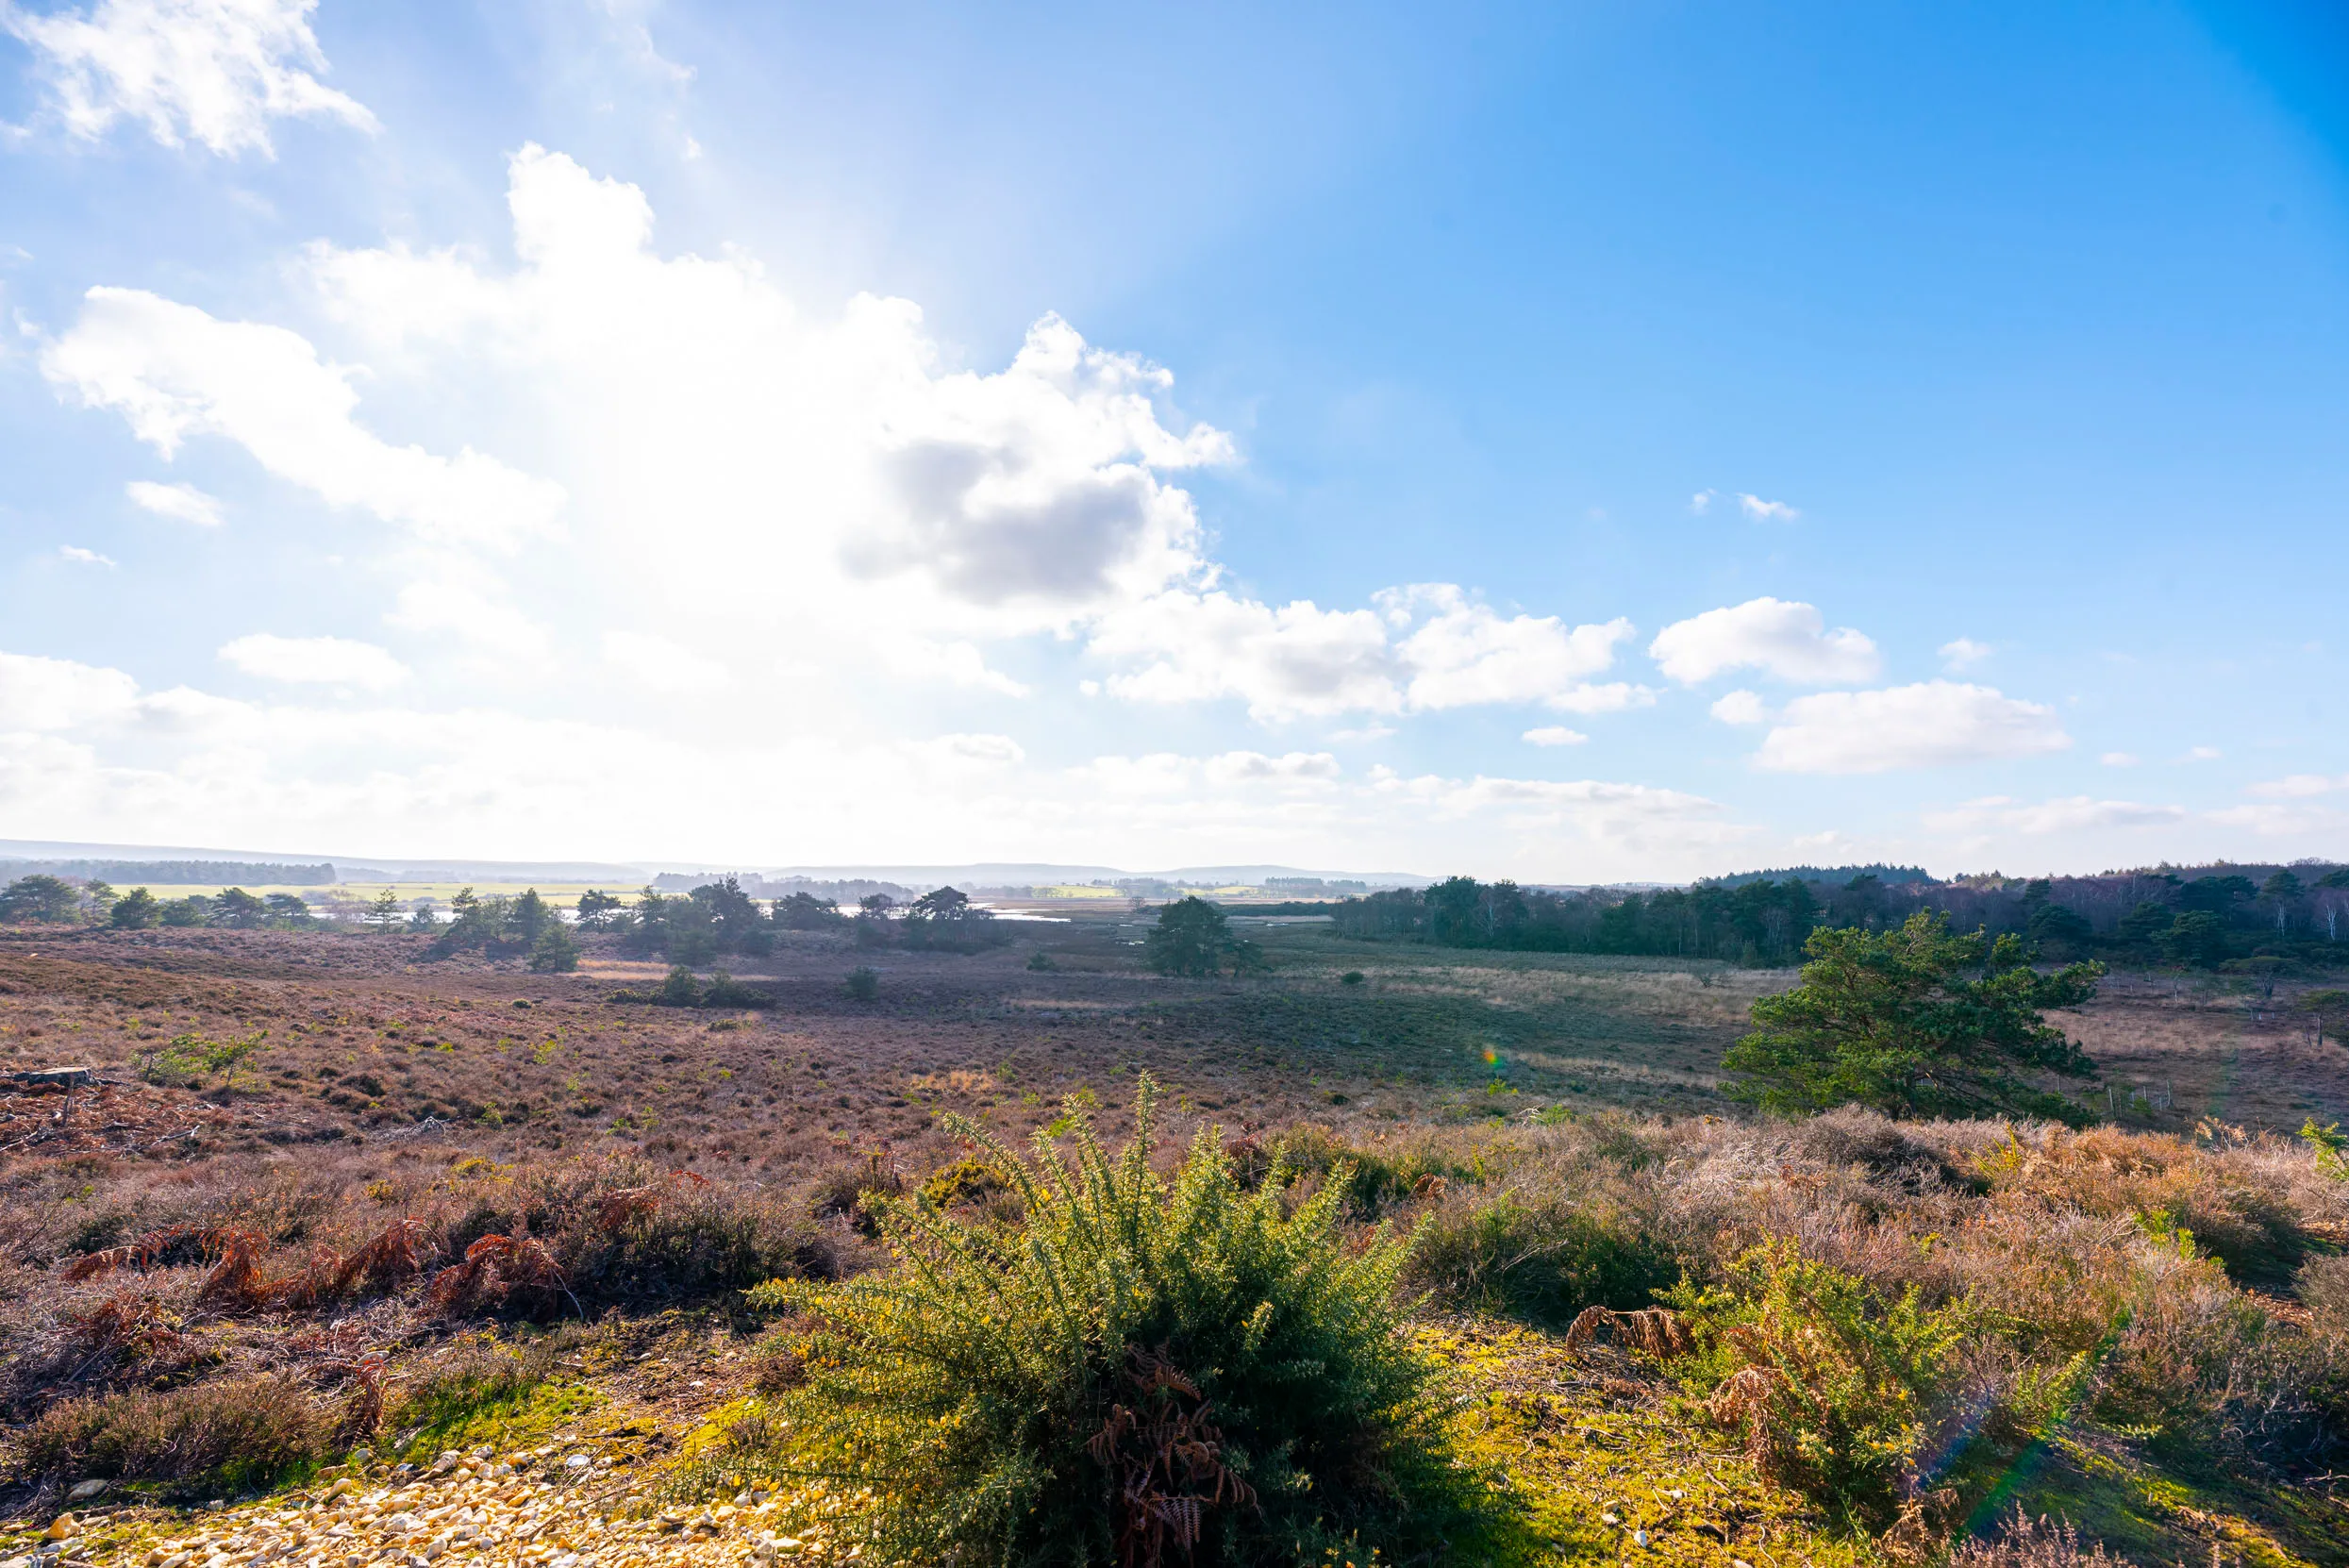 A view across the purple heathland at Arne